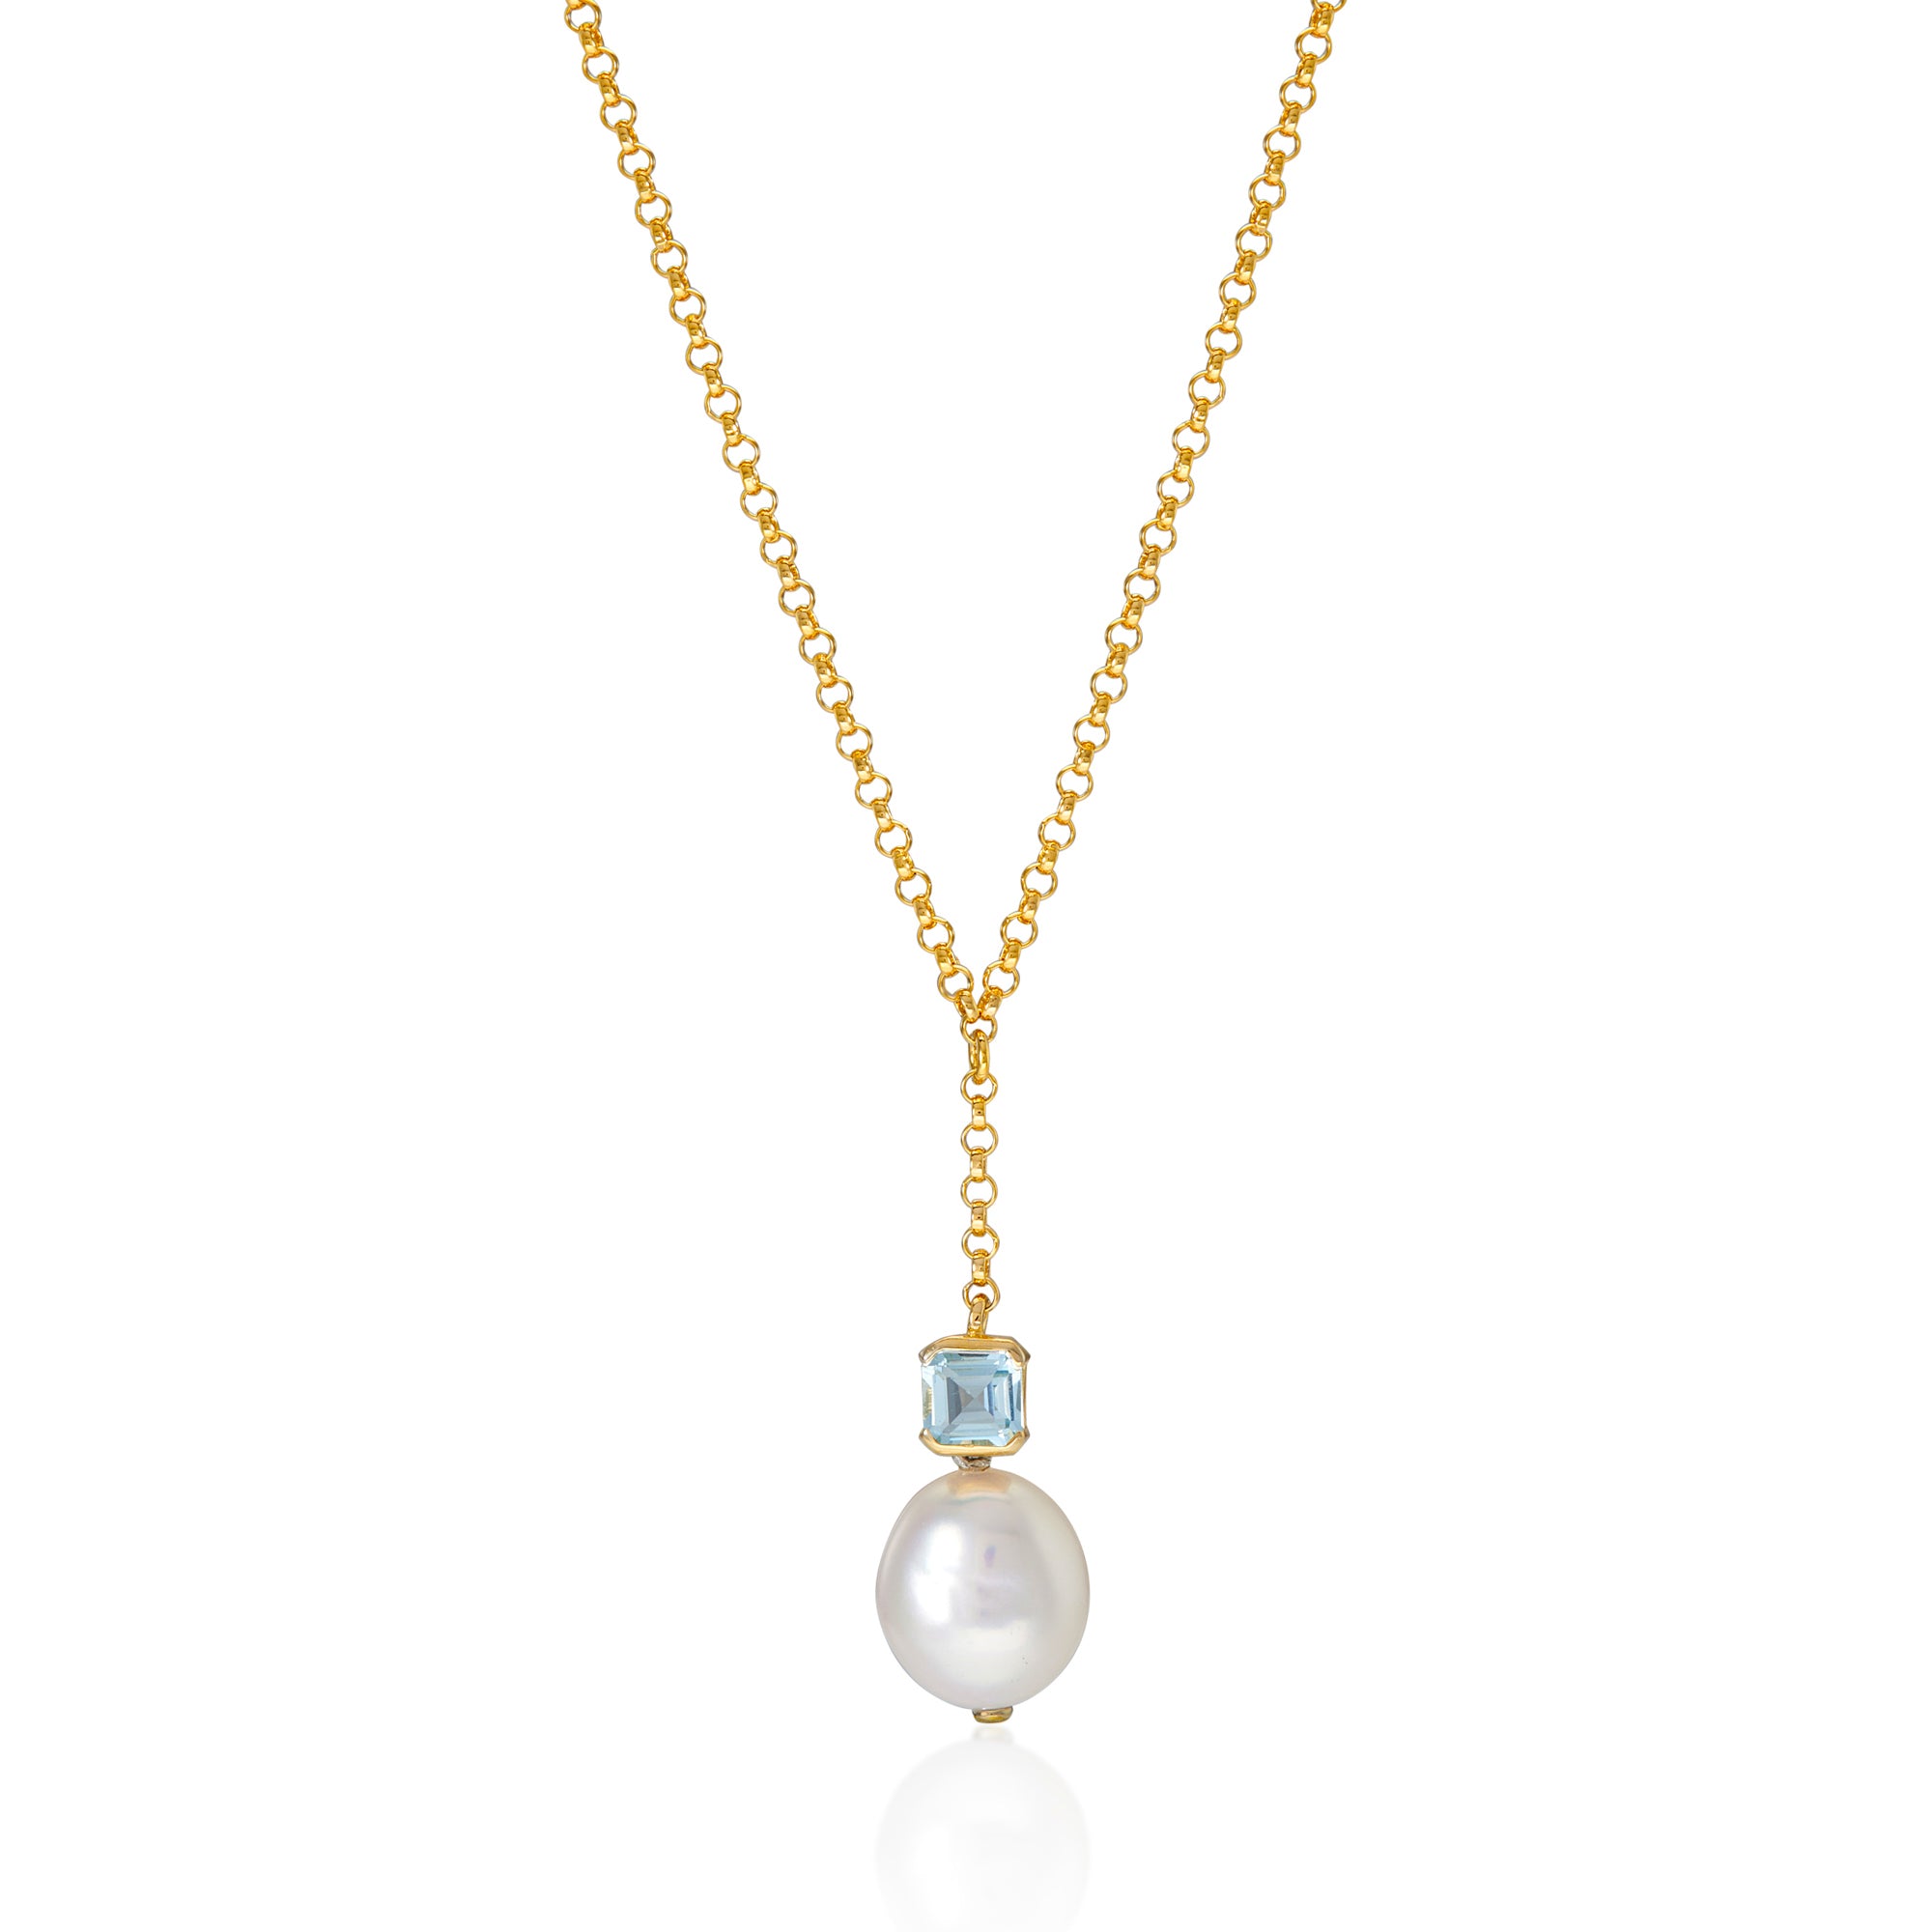 Bella Baroque Pearl Necklace in Gold and Blue Topaz